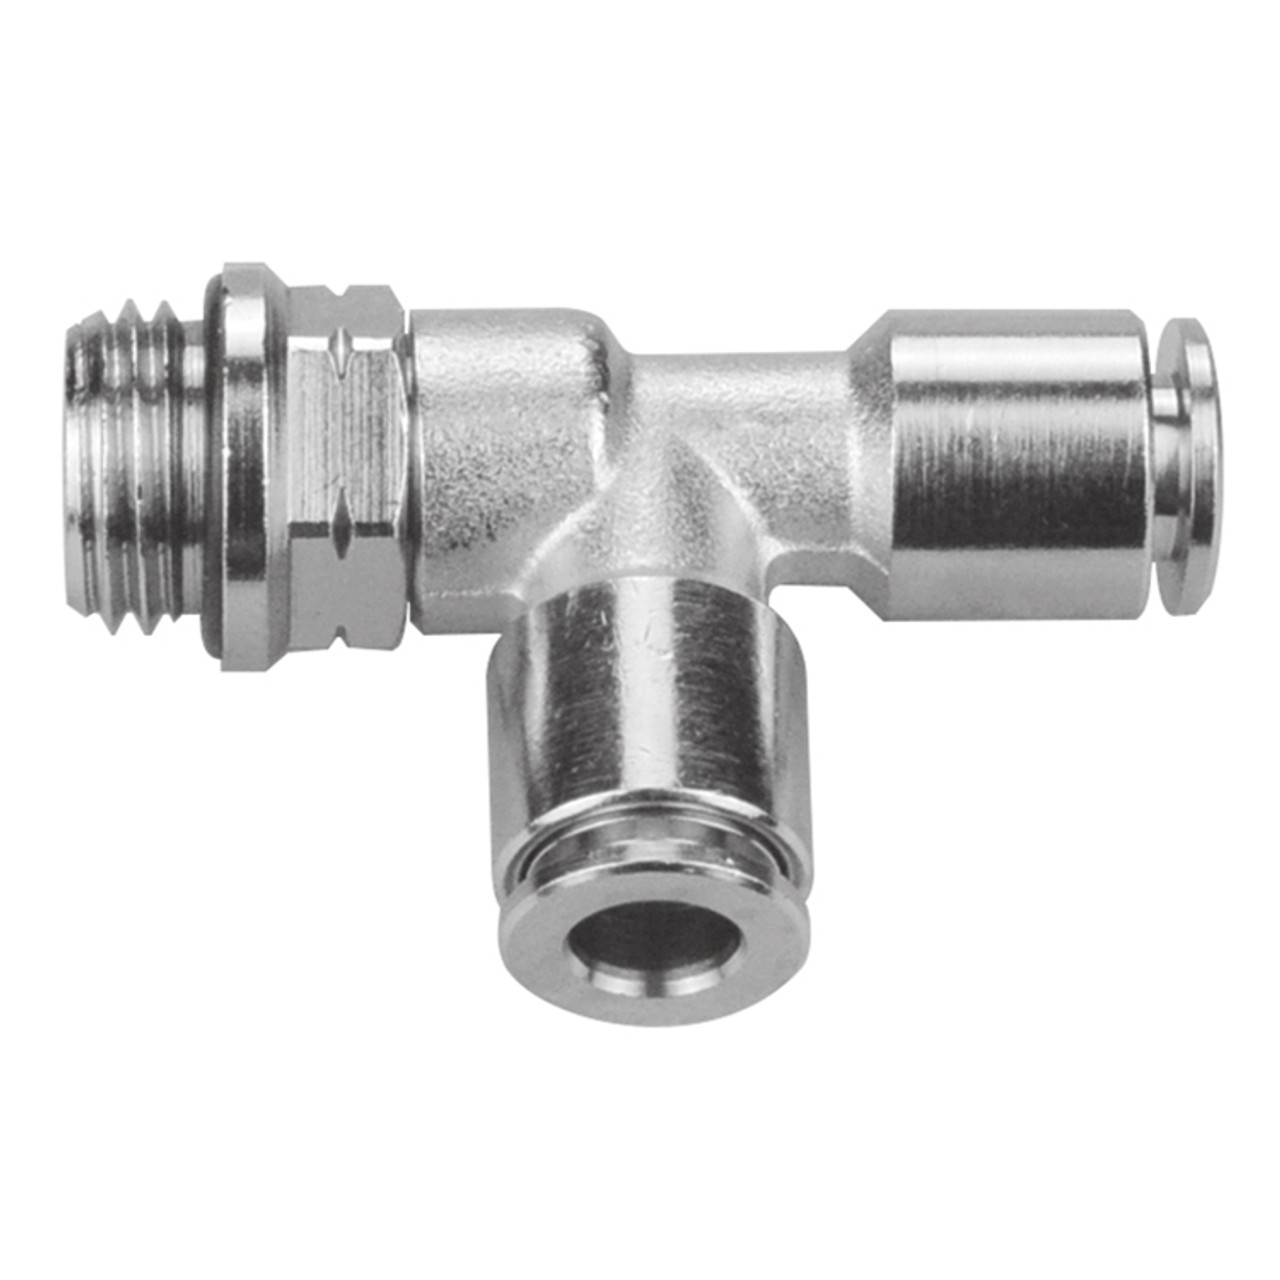 1/8 x 1/4 x 1/4" Nickel Plated Brass Uni Thread - Push-To-Connect - Push-To-Connect Tee   G60T1860P-02-04